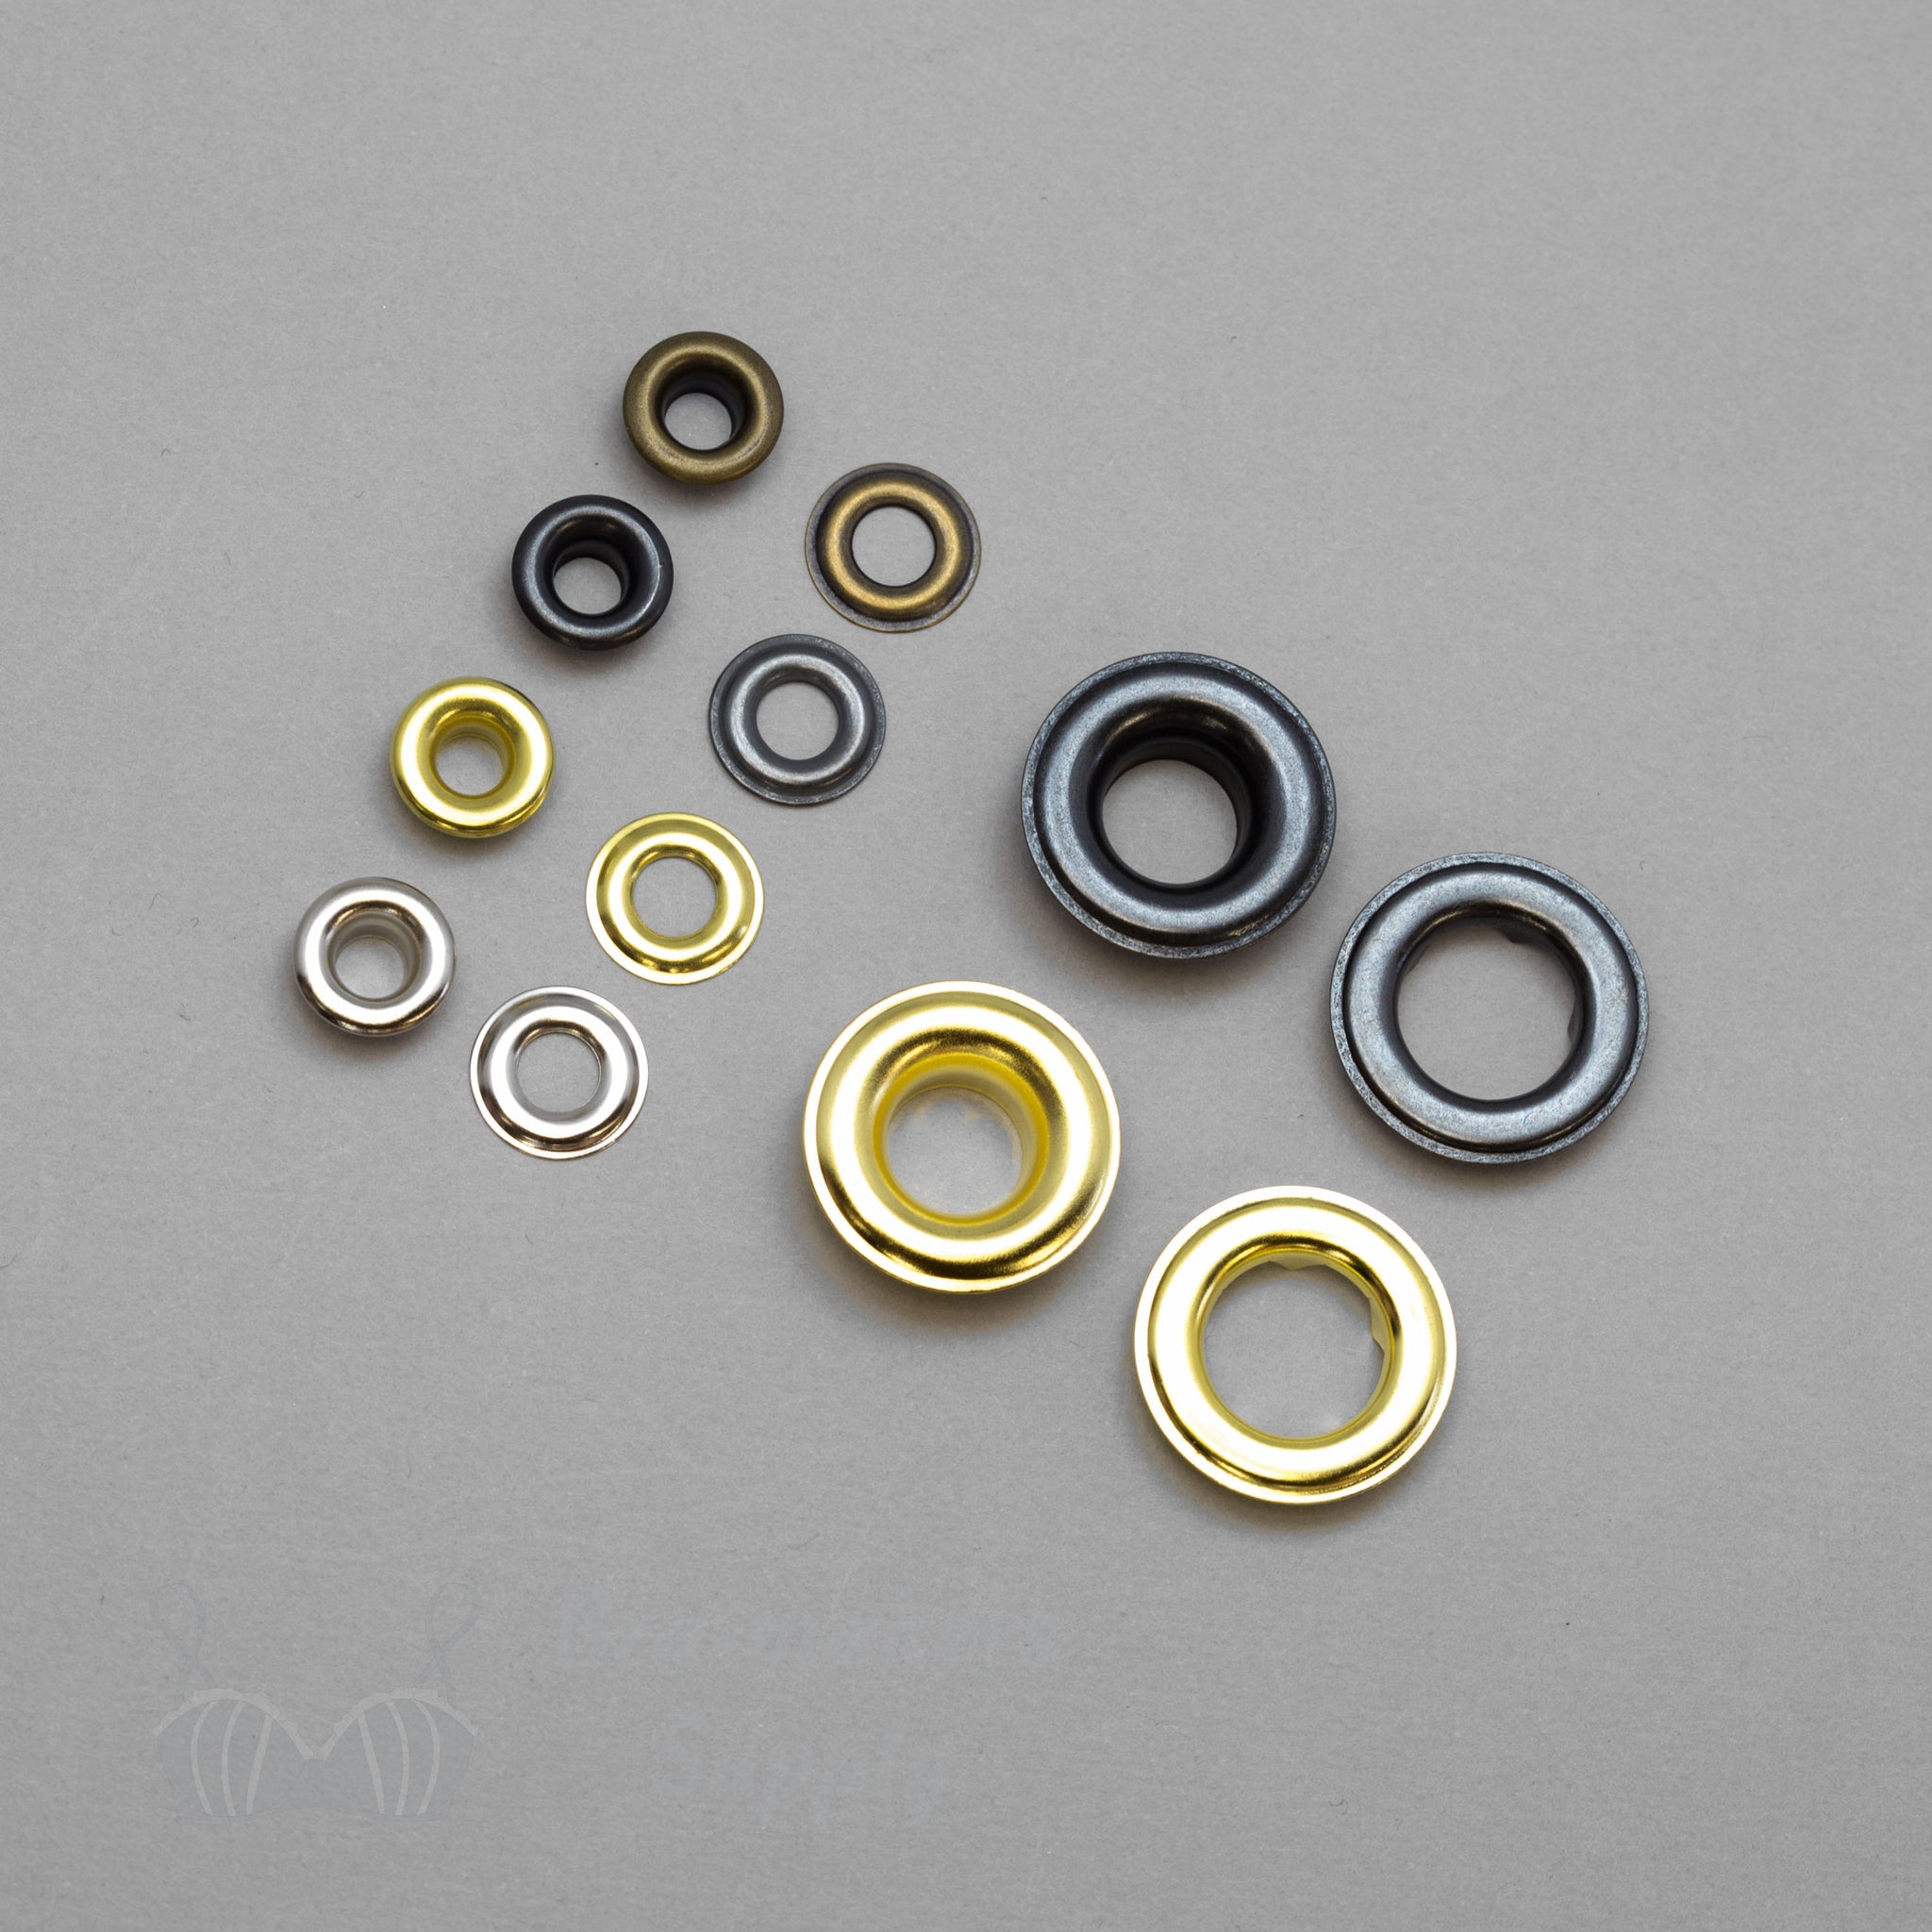 Round #15 (2'') Grommets and Washers - Nickel Finish - GROMMETMART